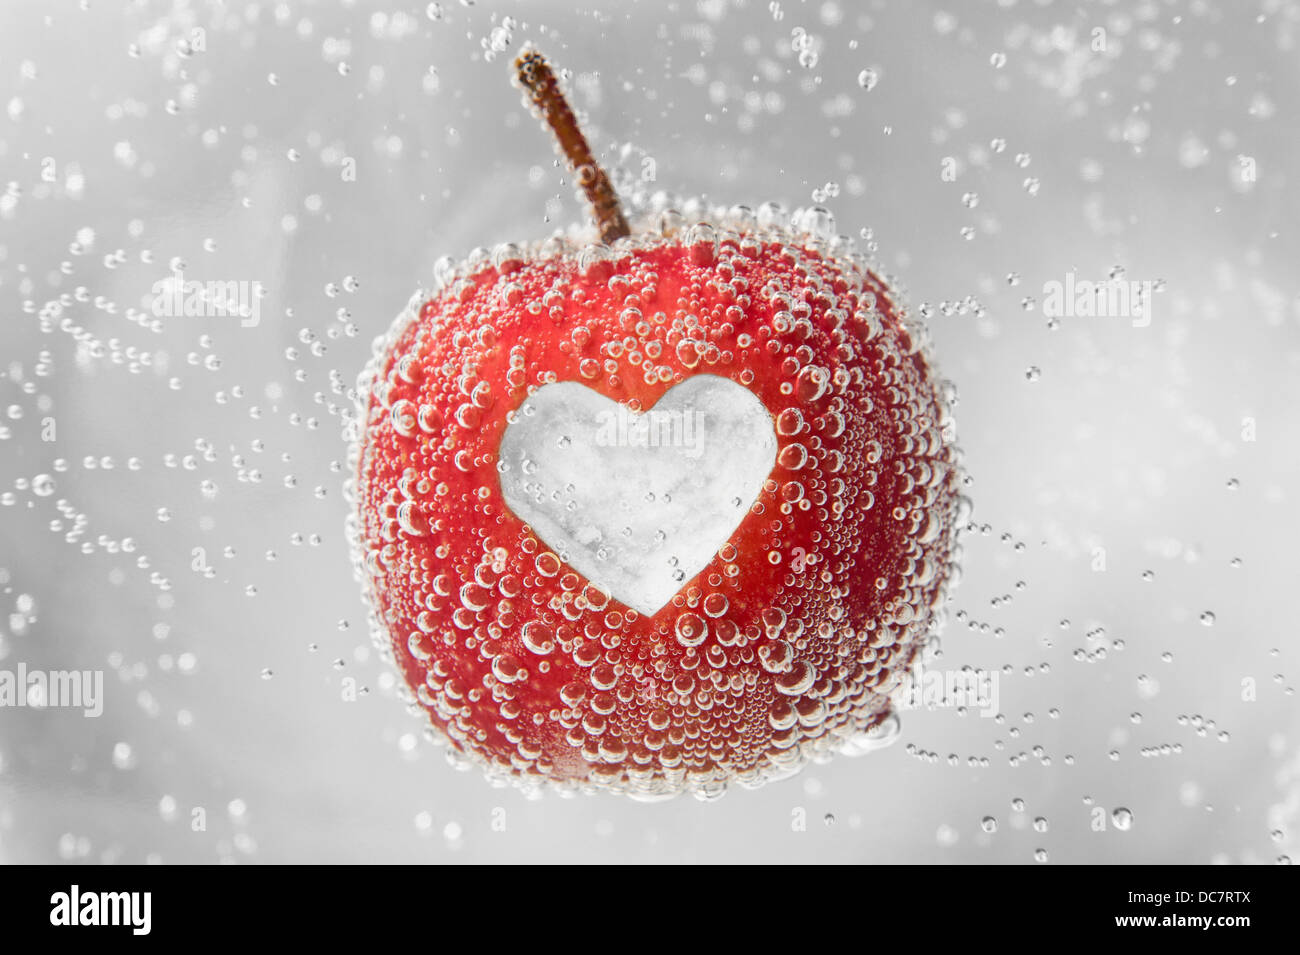 Red Apple with heart-shape cut-out in middle, floating in bubbly water. Stock Photo